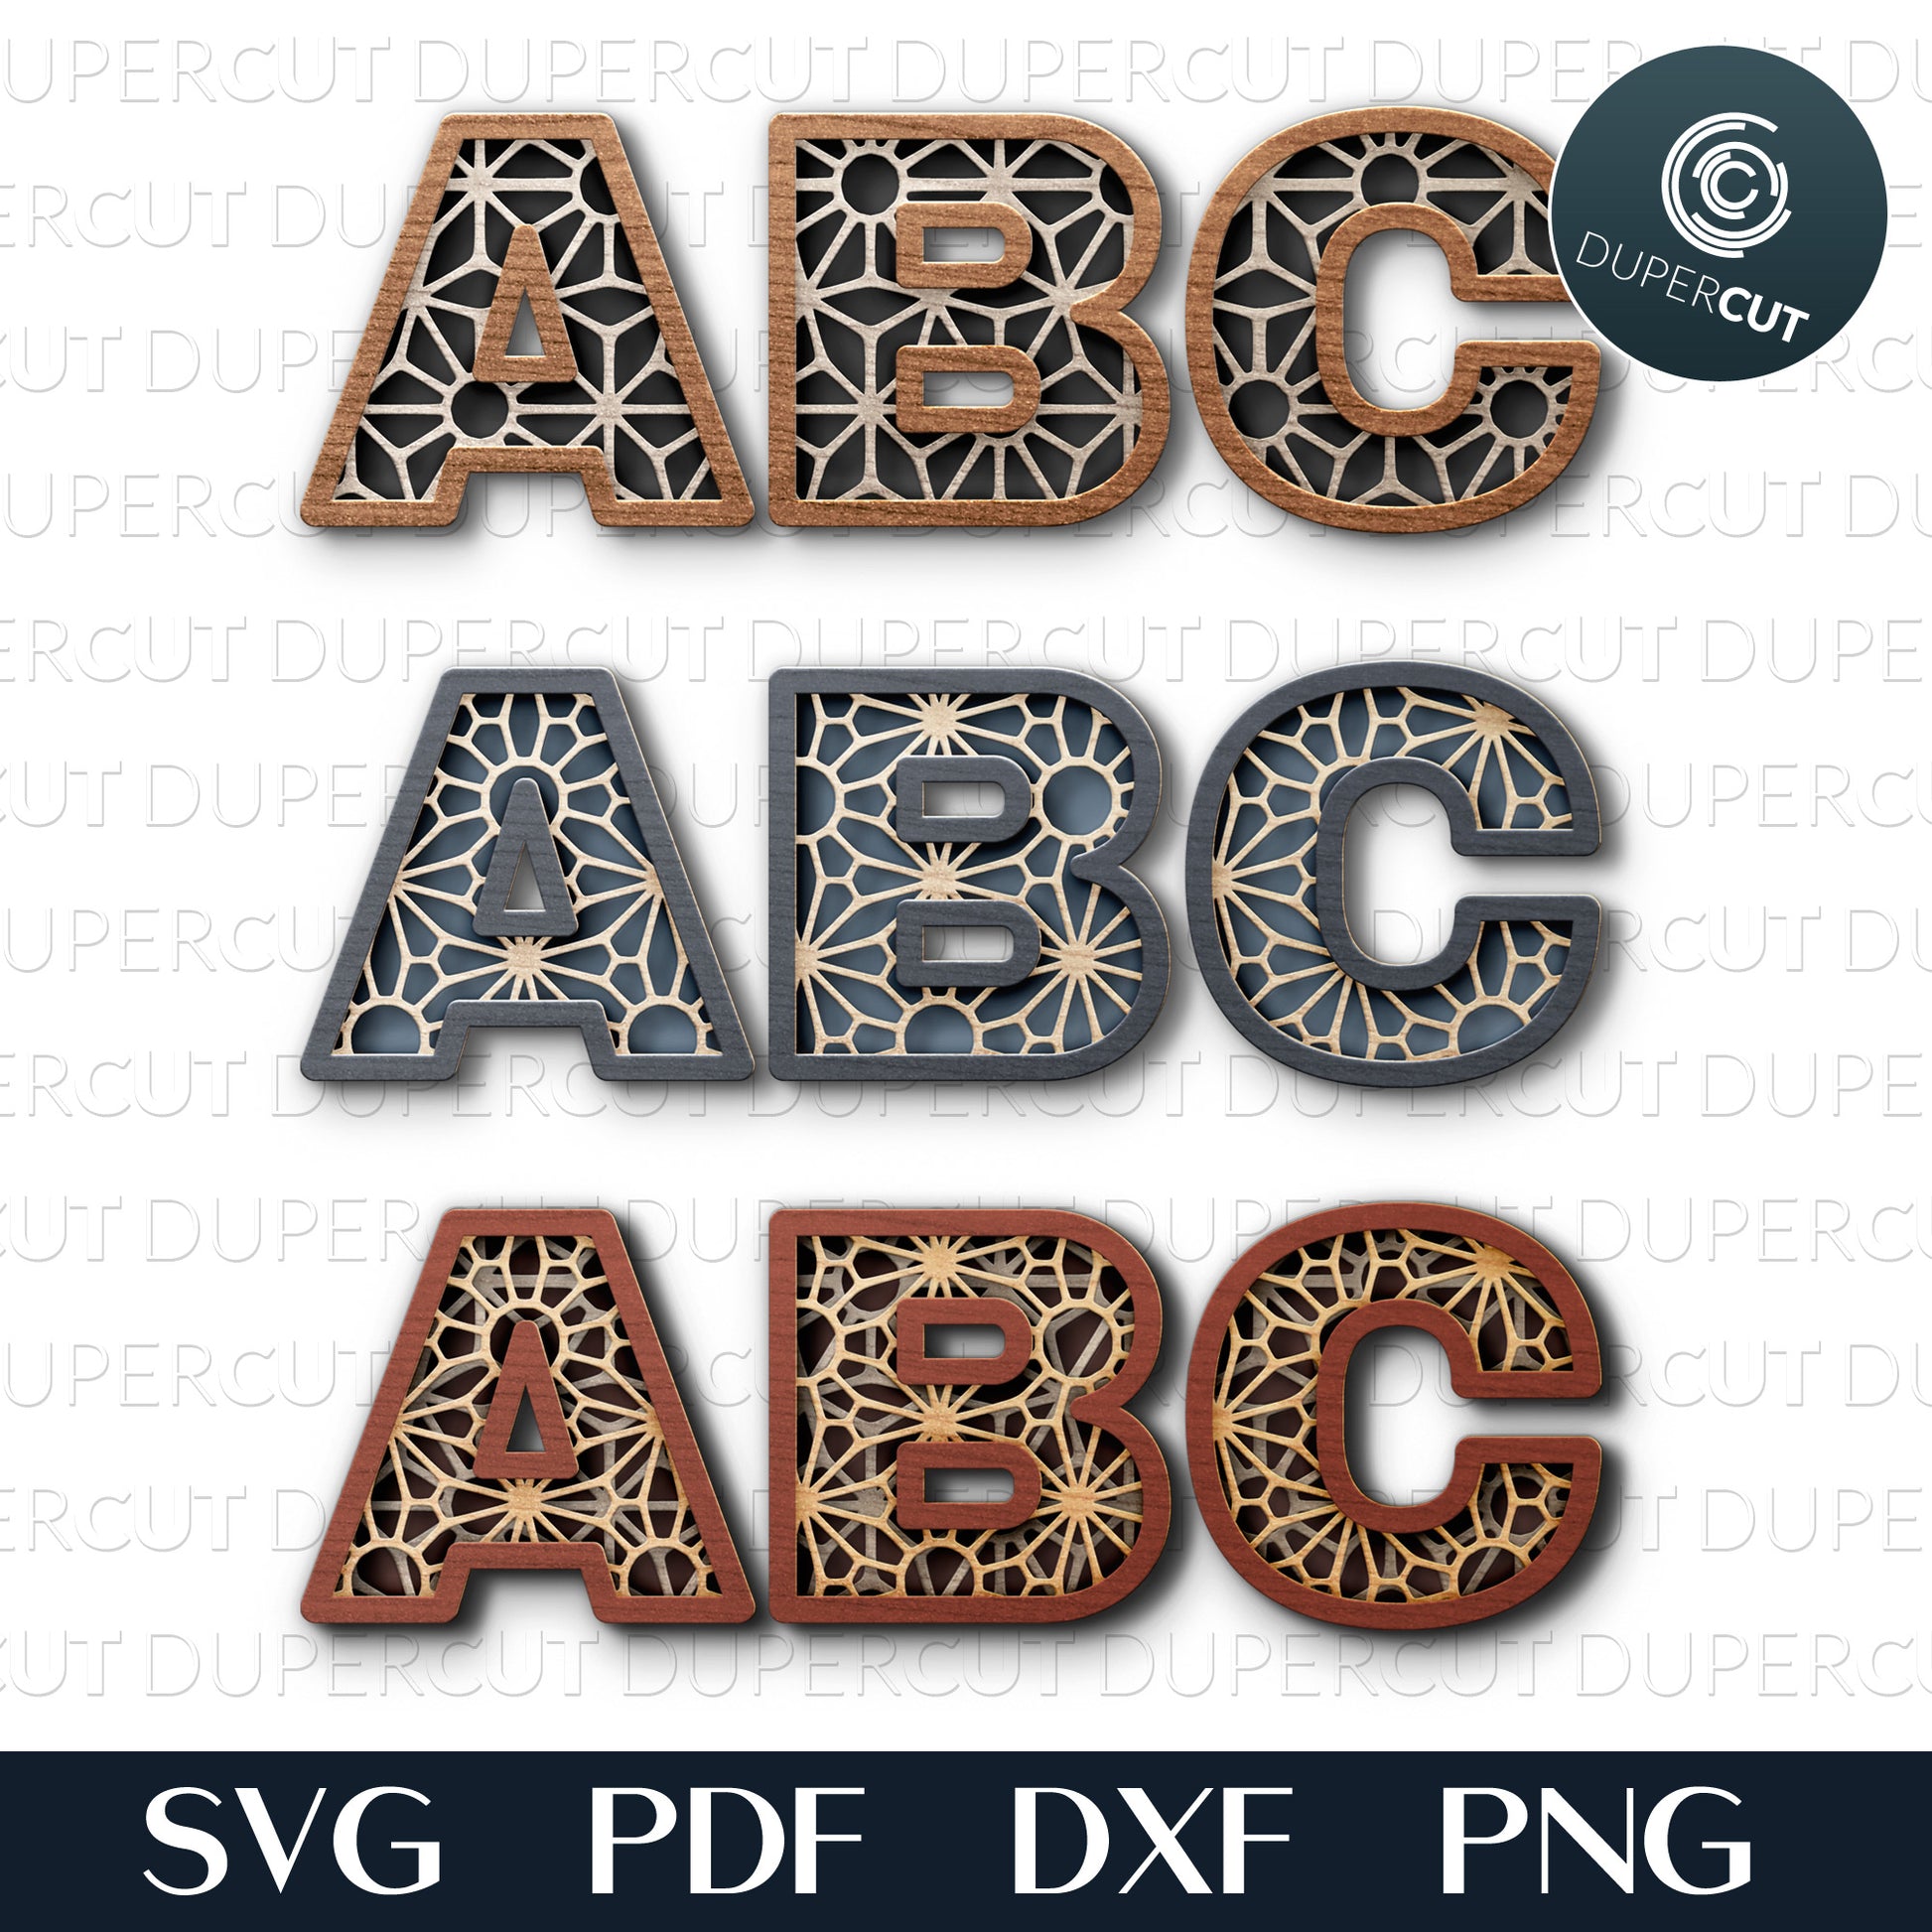 Multi-layer alphabet letters. SVG PNG DXF cutting files for Cricut, Glowforge, Silhouette cameo, laser engraving